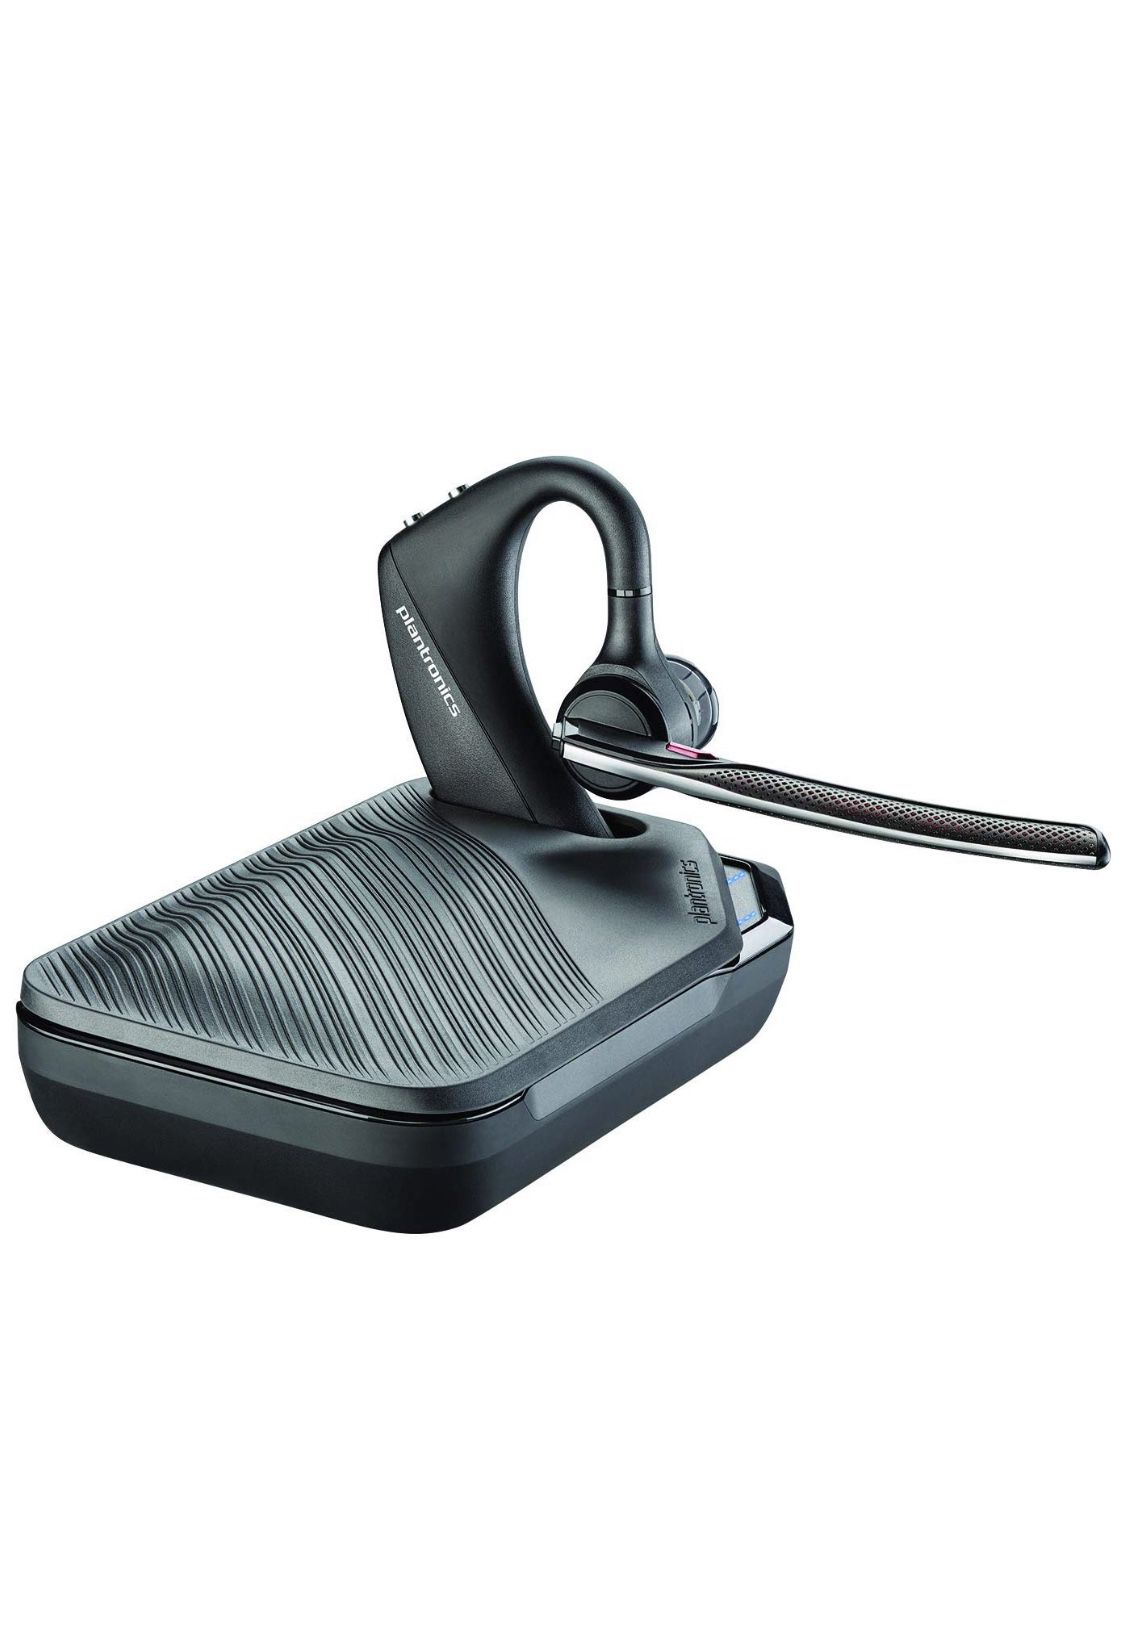 Plantronics Voyager 5200 Bluetooth Mobile Over-The-Ear Headset, With Charging Case